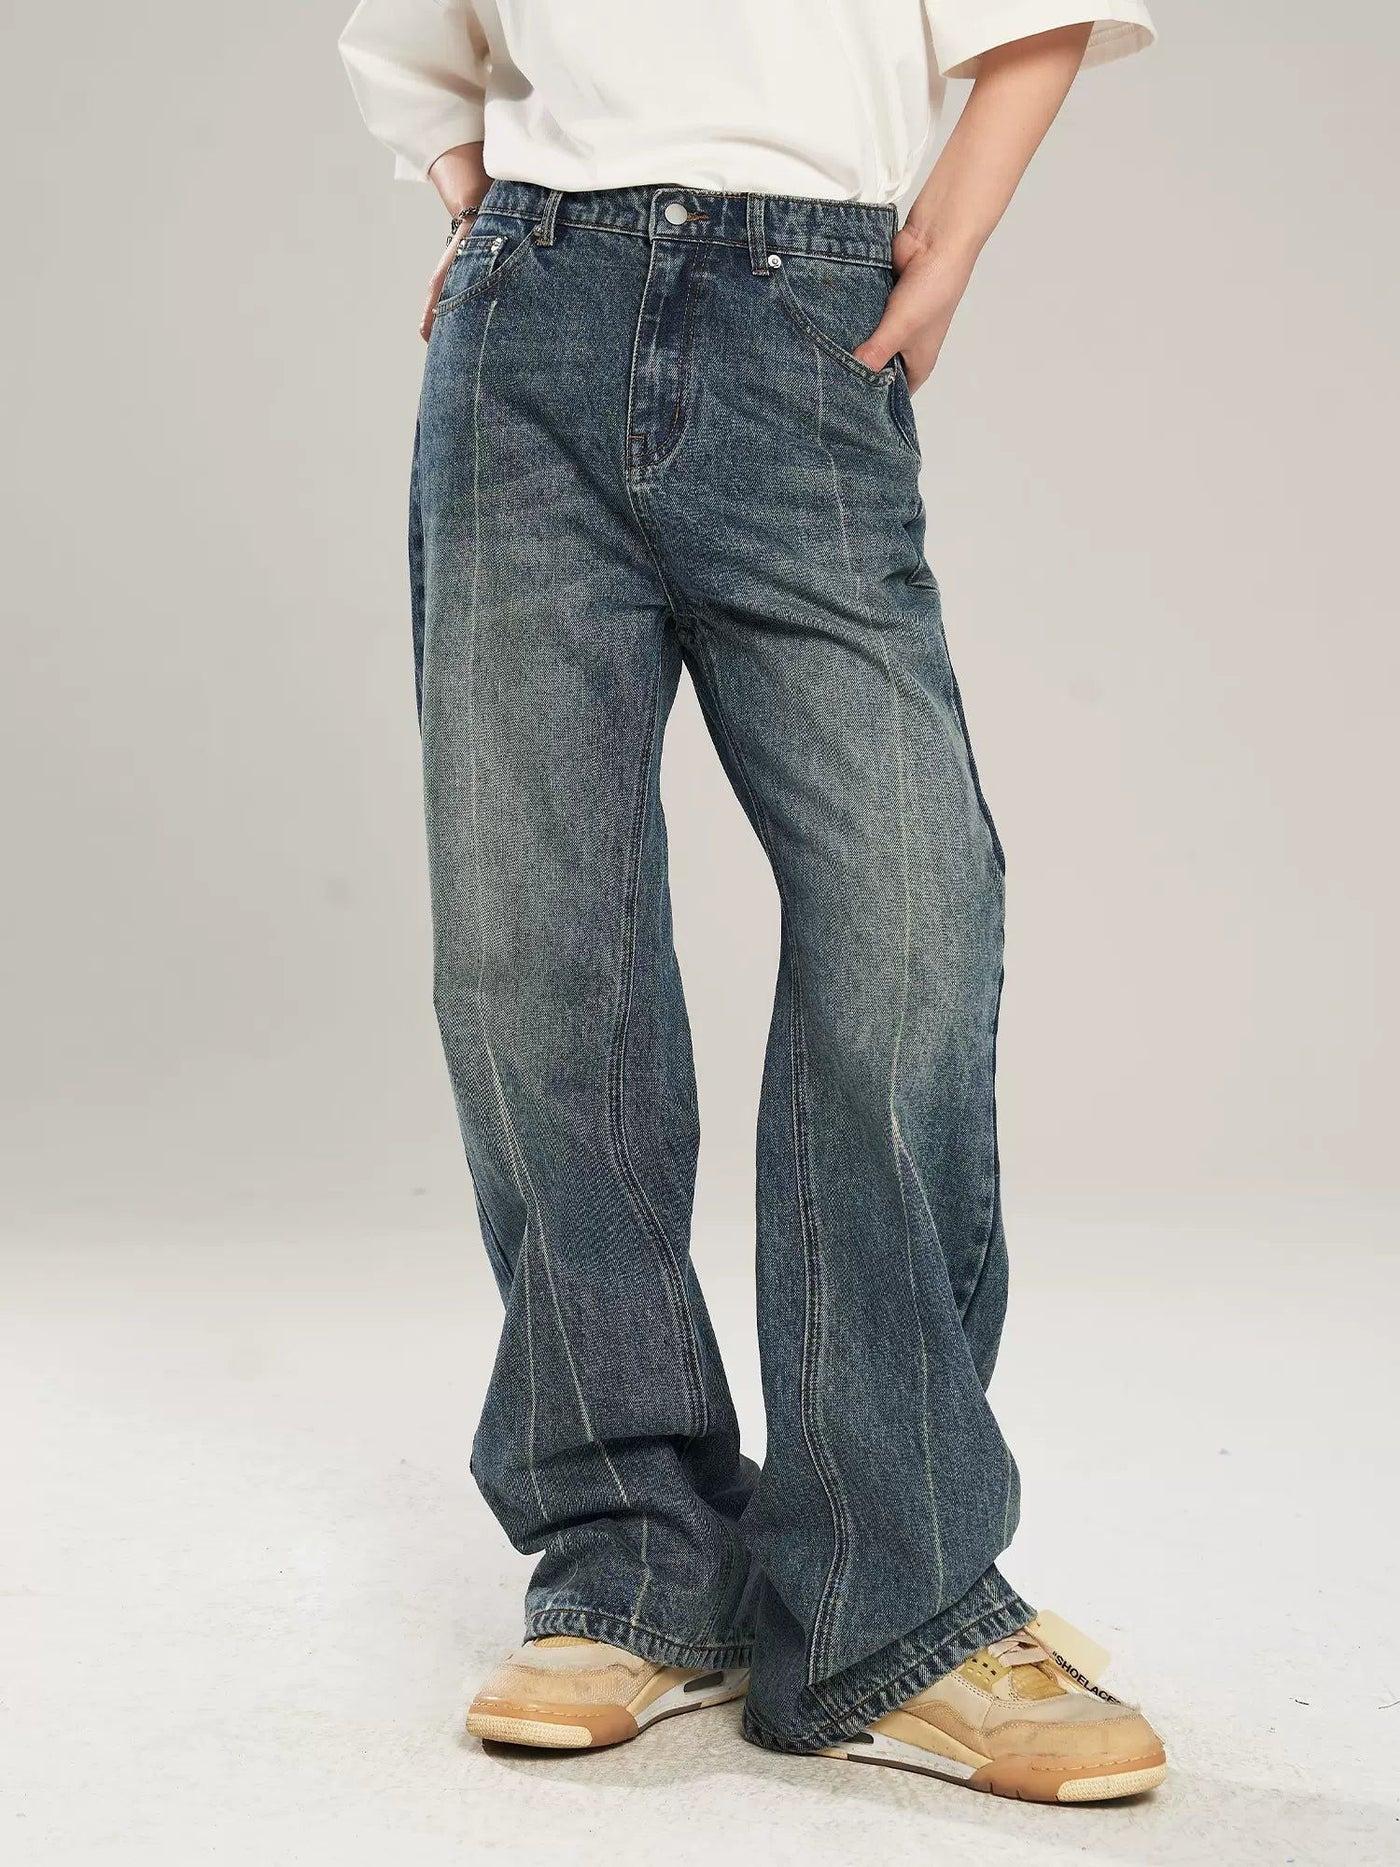 Thin Line Detail Jeans Korean Street Fashion Jeans By New Start Shop Online at OH Vault